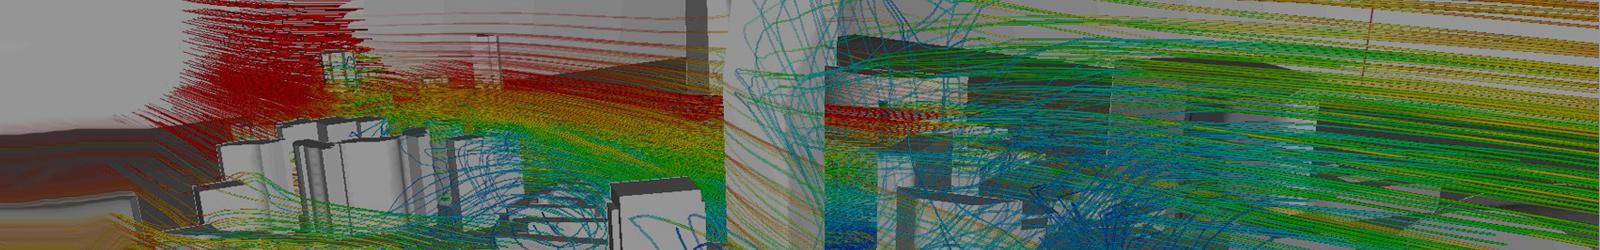 Product CFD Analysis (Advanced) Services | BE Consulting Engineers image